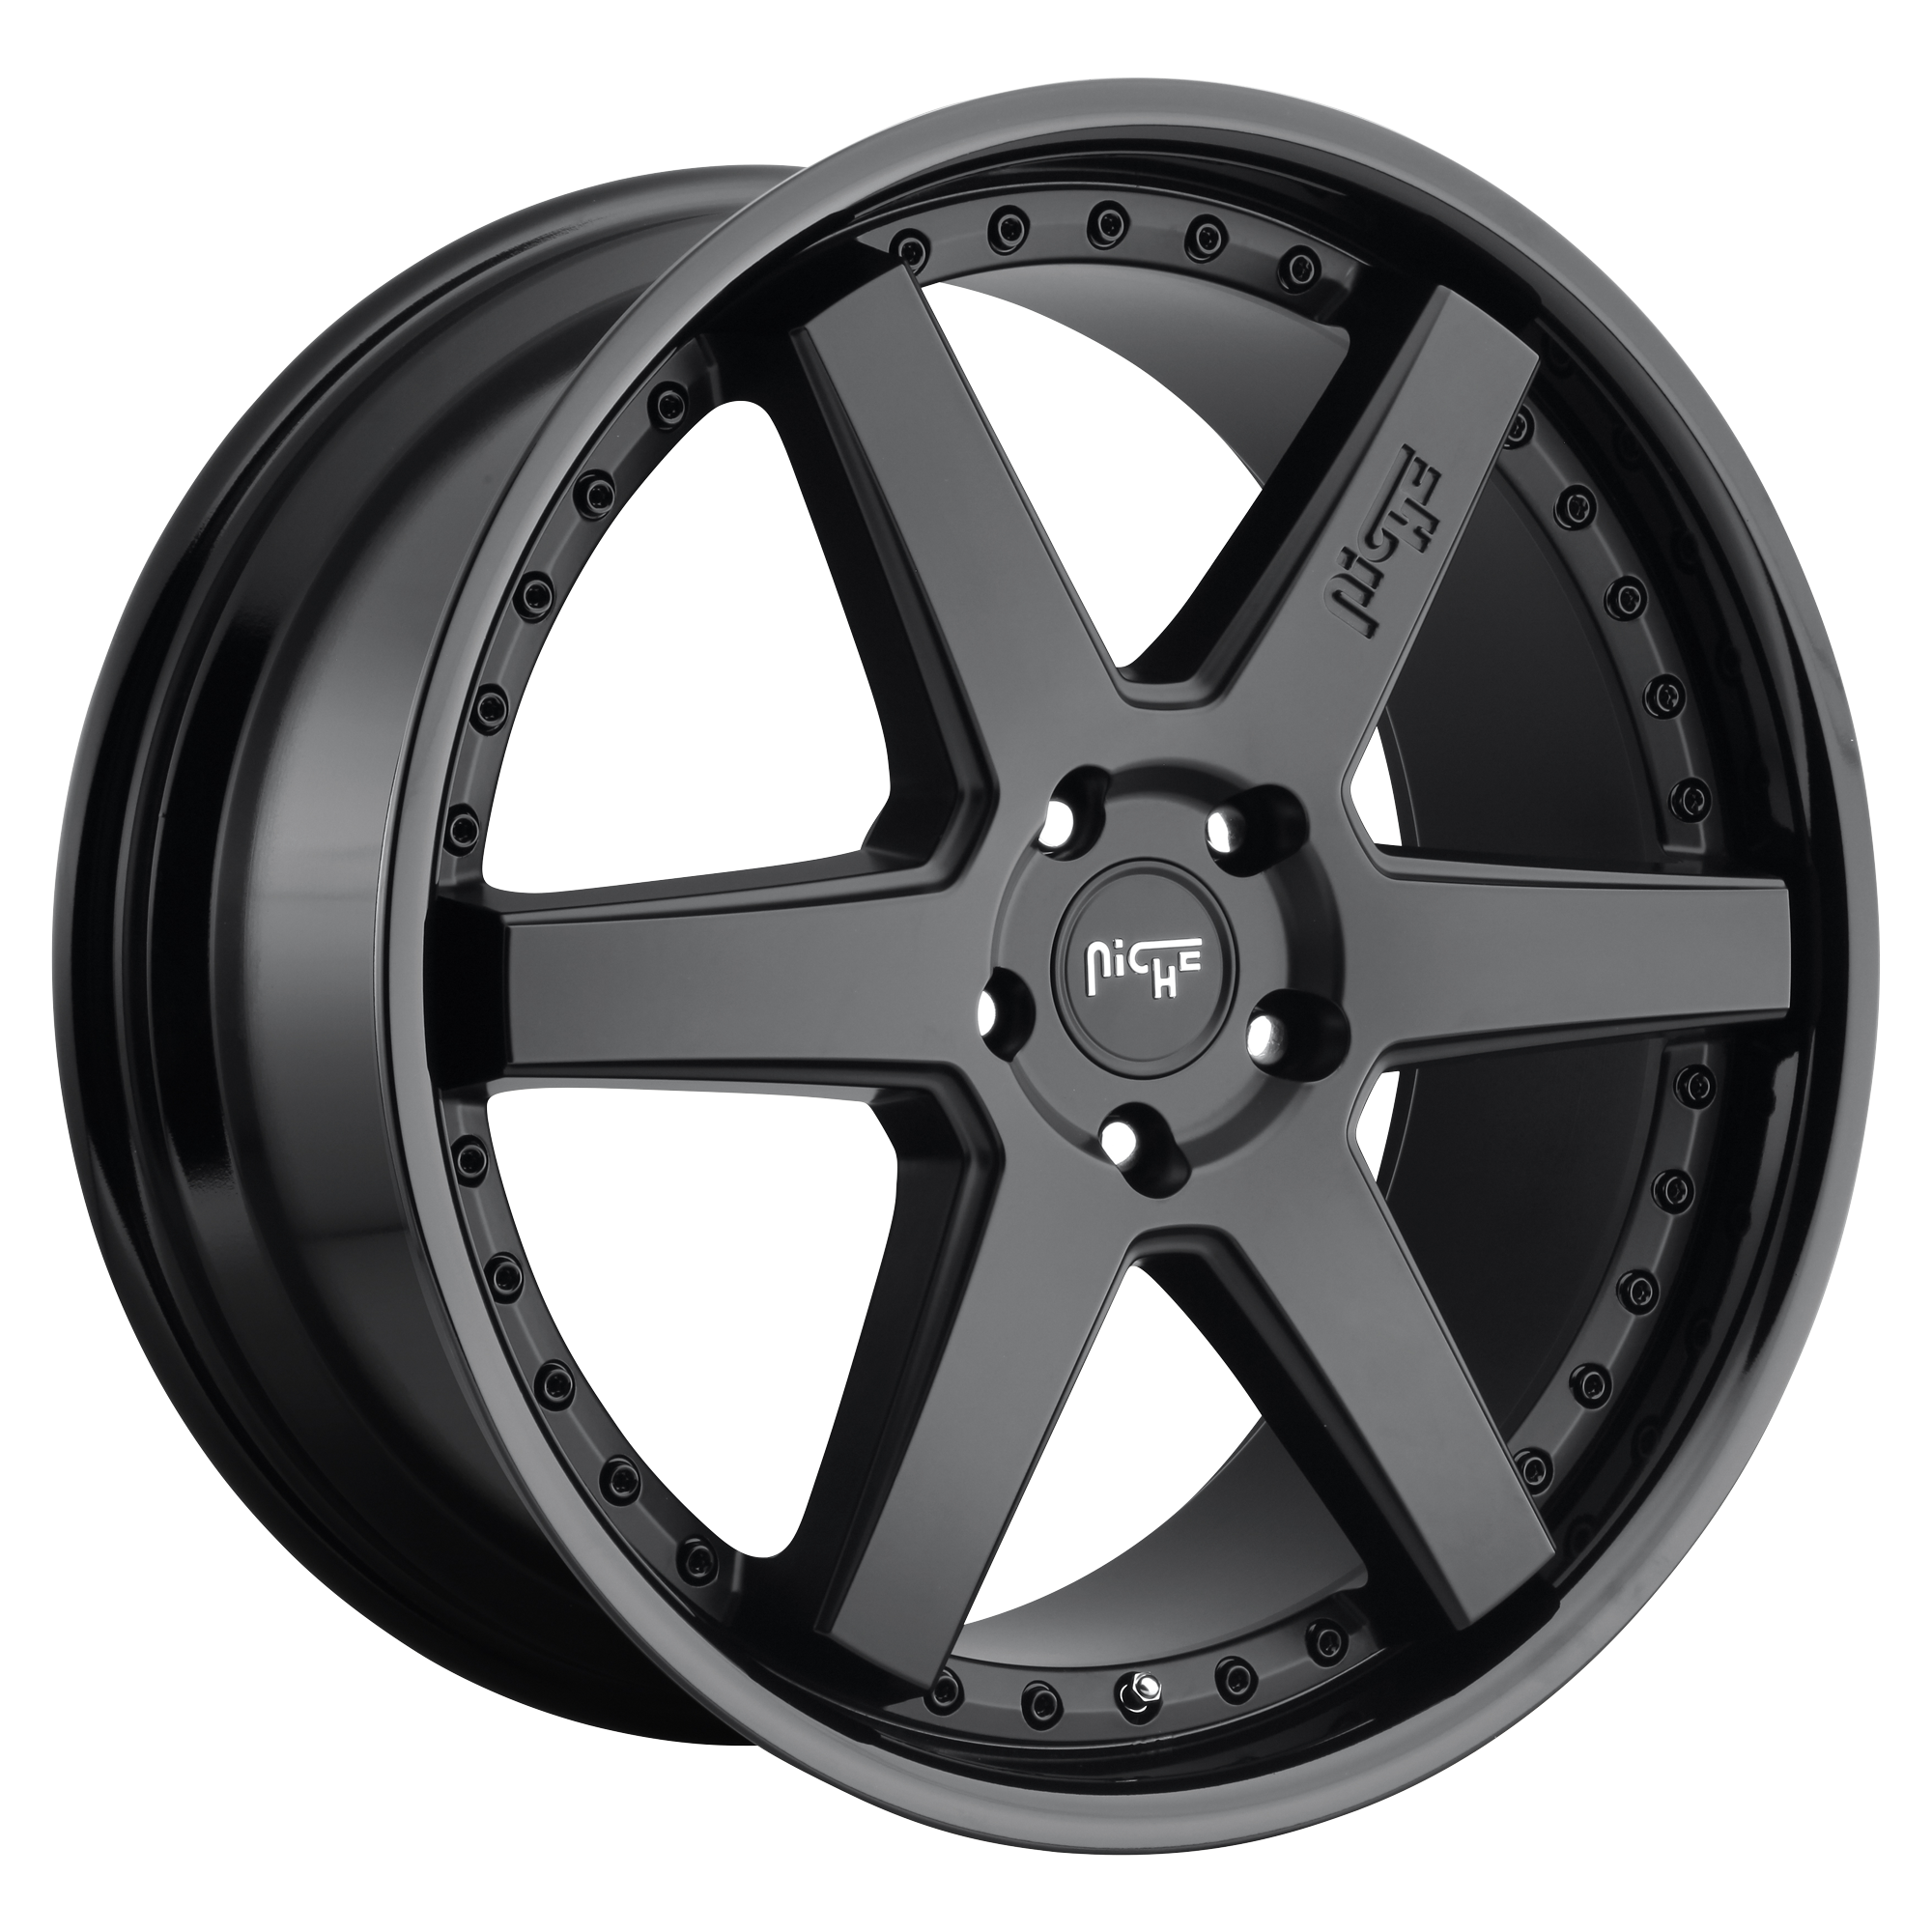 ALTAIR 20x9 5x114.30 GLOSS BLACK MATTE BLACK (35 mm) - Tires and Engine Performance